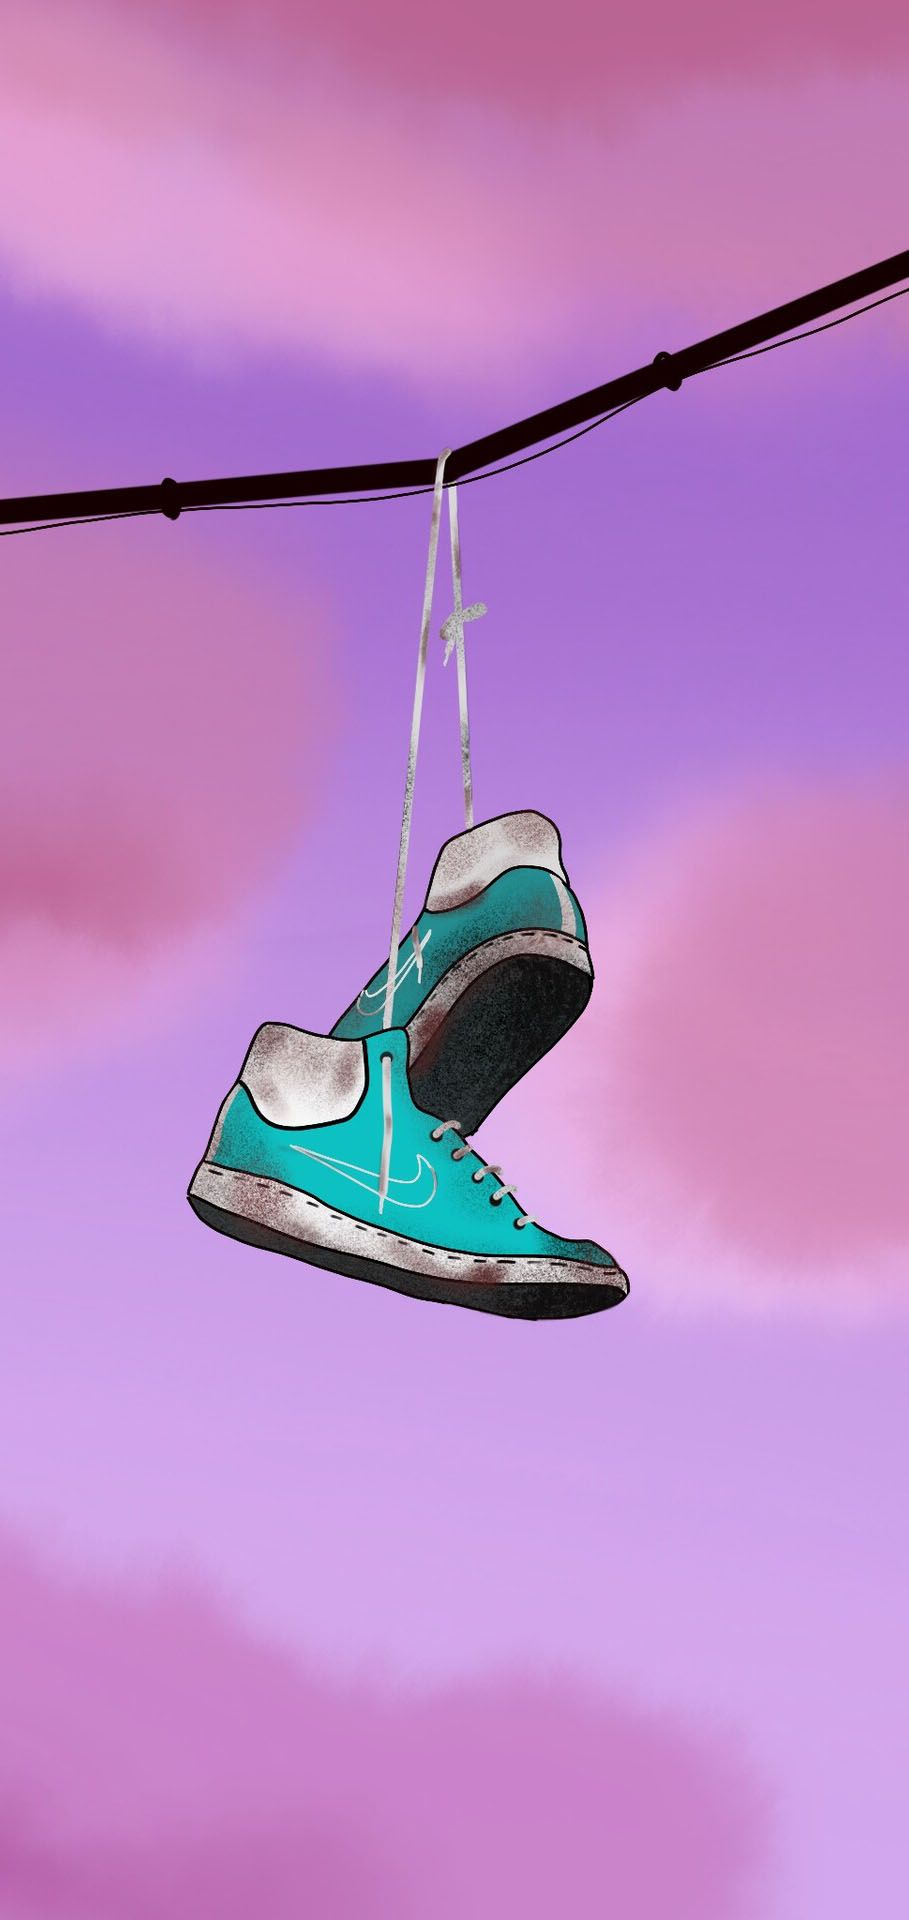 A pair of shoes hanging from the wire - Shoes, Nike